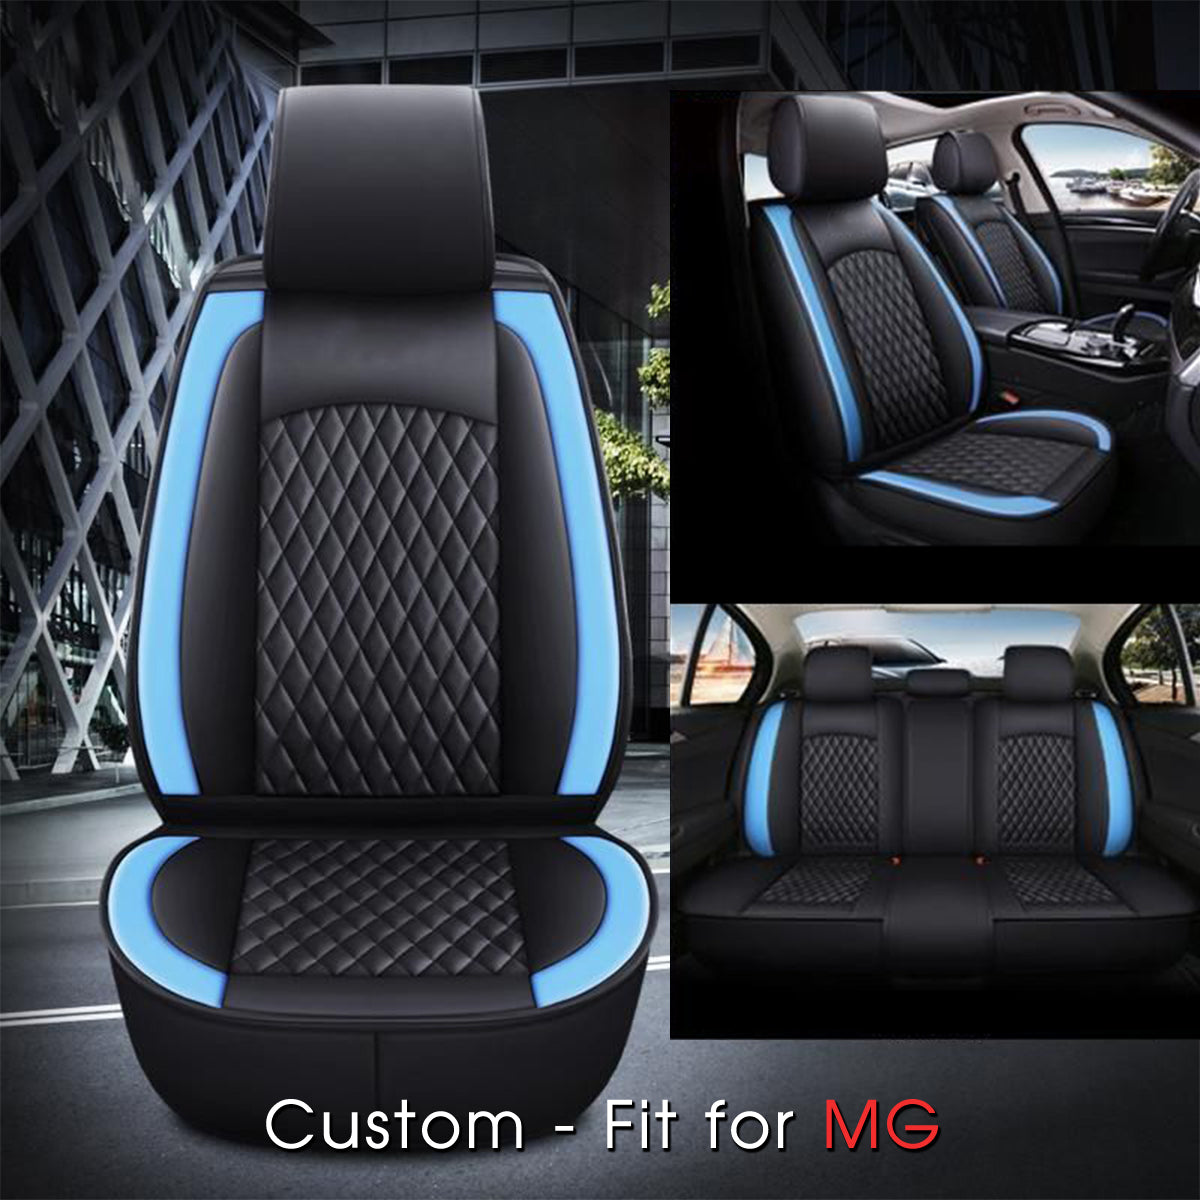 2 Car Seat Covers Full Set, Custom-Fit For Car, Waterproof Leather Front Rear Seat Automotive Protection Cushions, Car Accessories DLMC211